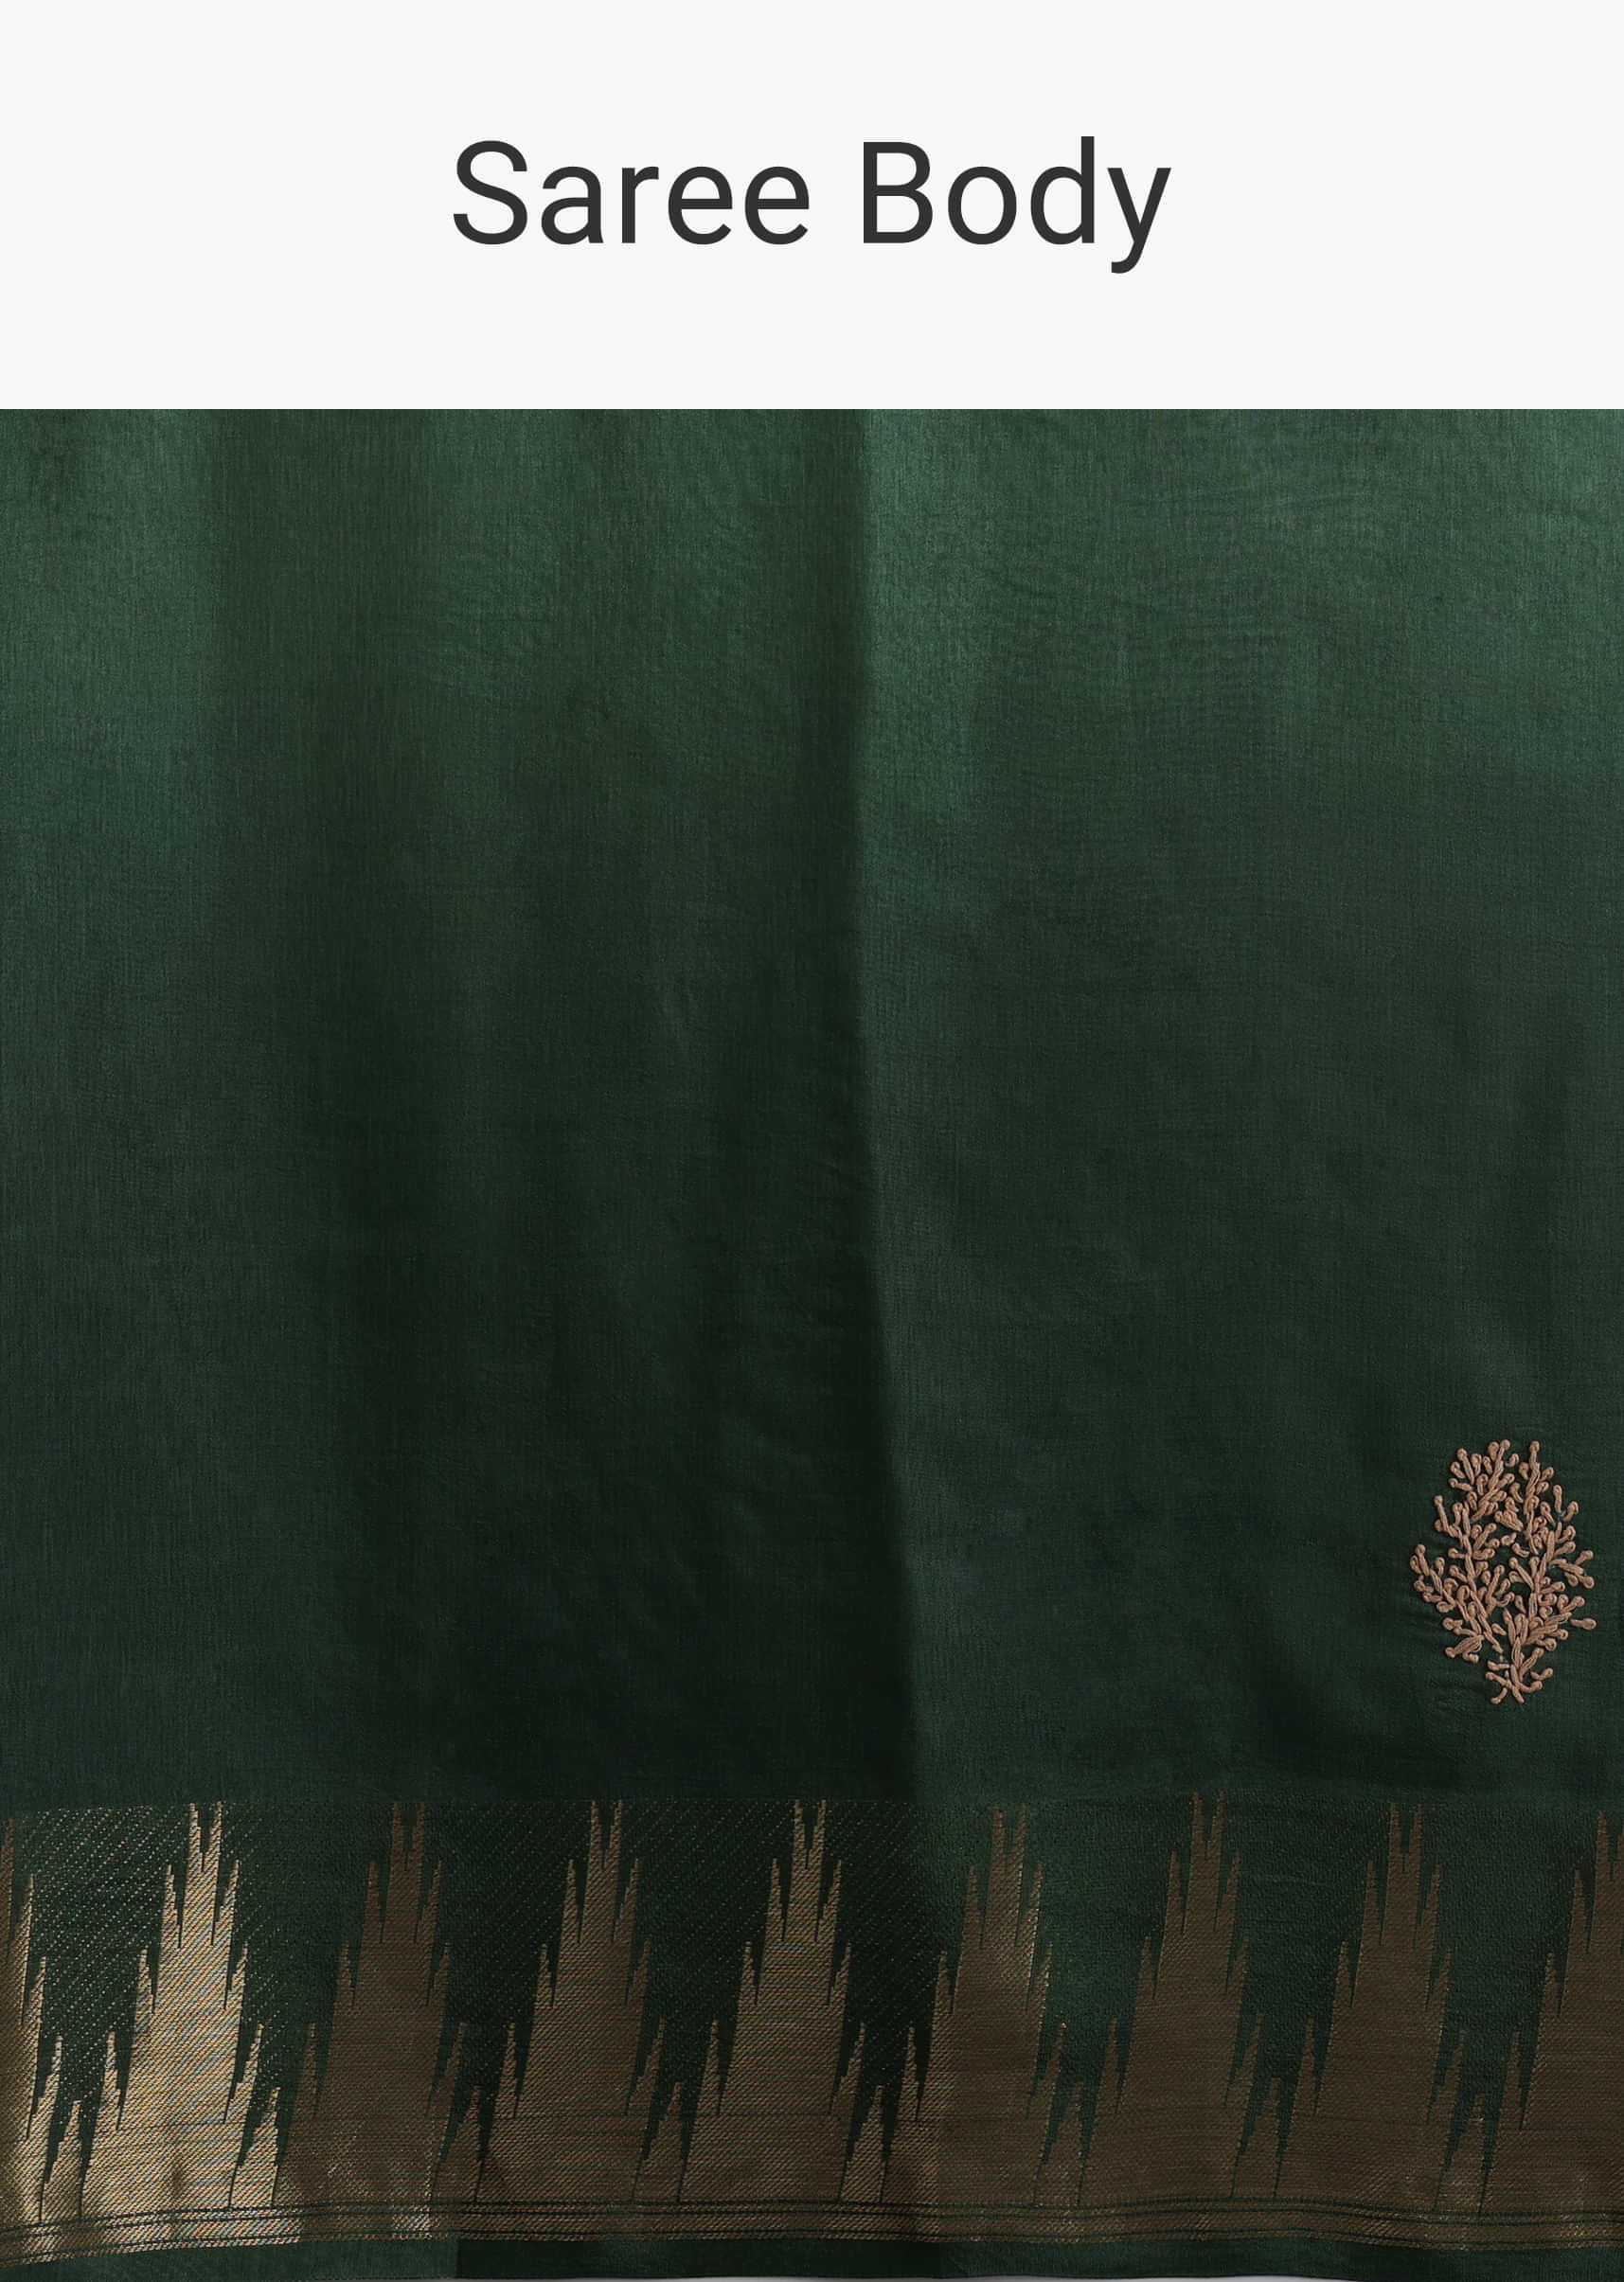 Dual-Tone Green Ombre Saree With Resham 3D Bud And Threadwork Embroidery In Dola Crepe